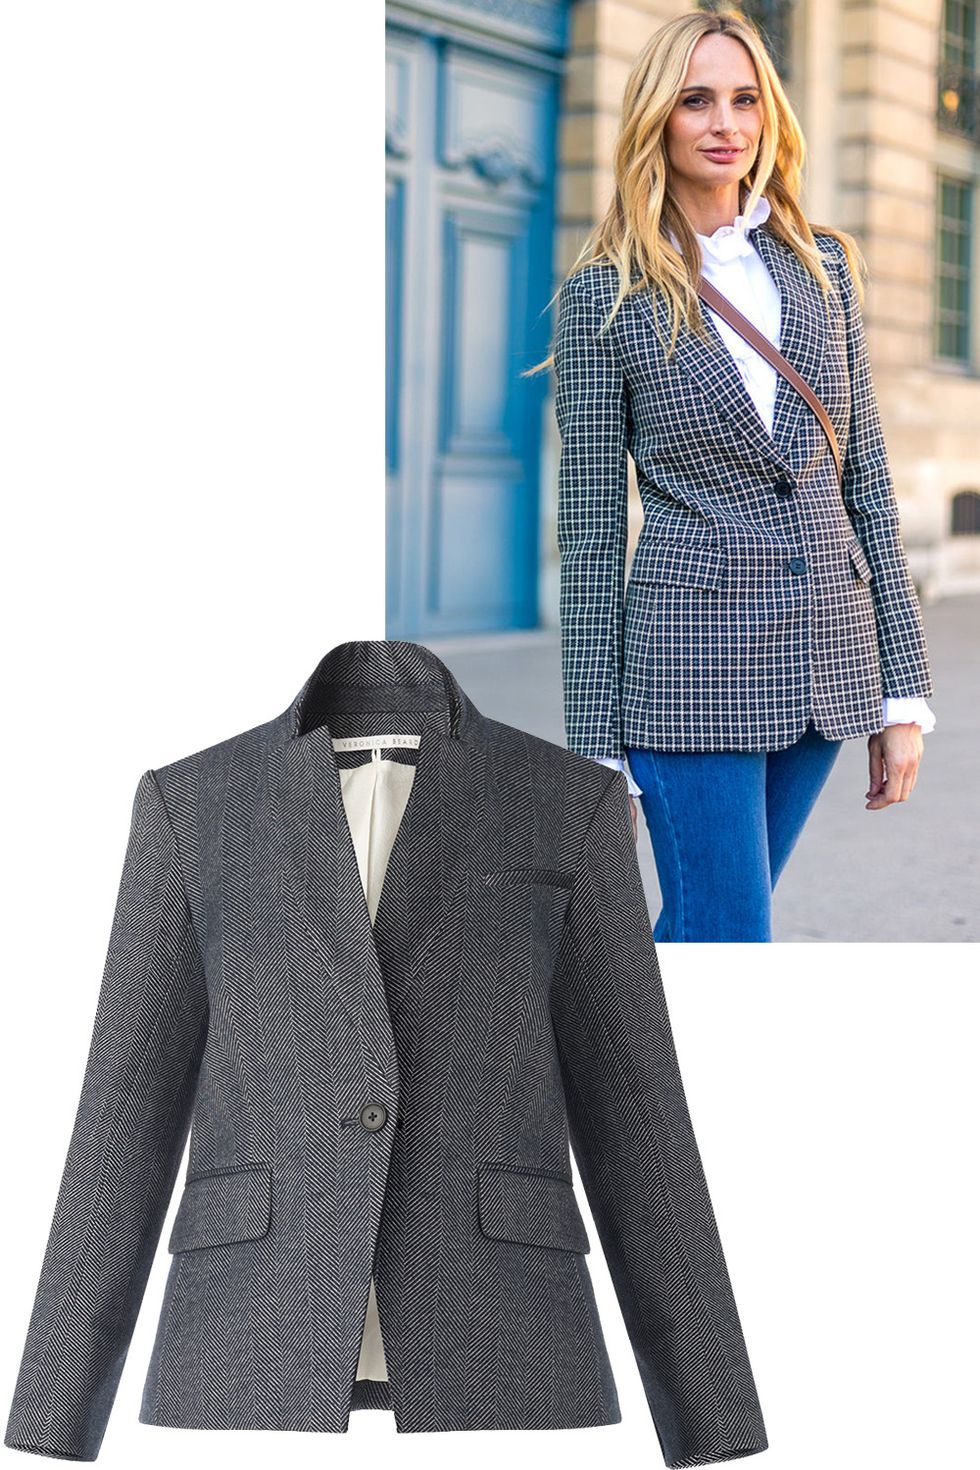 <p>Who: Lauren Santo Domingo</p><p>What: A well-fitted jacket and jeans&nbsp;gives a sleek yet powerful vibe.</p><p><em data-redactor-tag="em" data-verified="redactor">Veronica Beard jacket, $595</em><span class="redactor-invisible-space" data-verified="redactor" data-redactor-tag="span" data-redactor-class="redactor-invisible-space"><em data-redactor-tag="em" data-verified="redactor">, <a href="https://www.veronicabeard.com/anaheim-upcollar-schoolboy-dickey-jacket.html?color=Navy" target="_blank">veronicabeard.com</a>.&nbsp;</em></span></p>